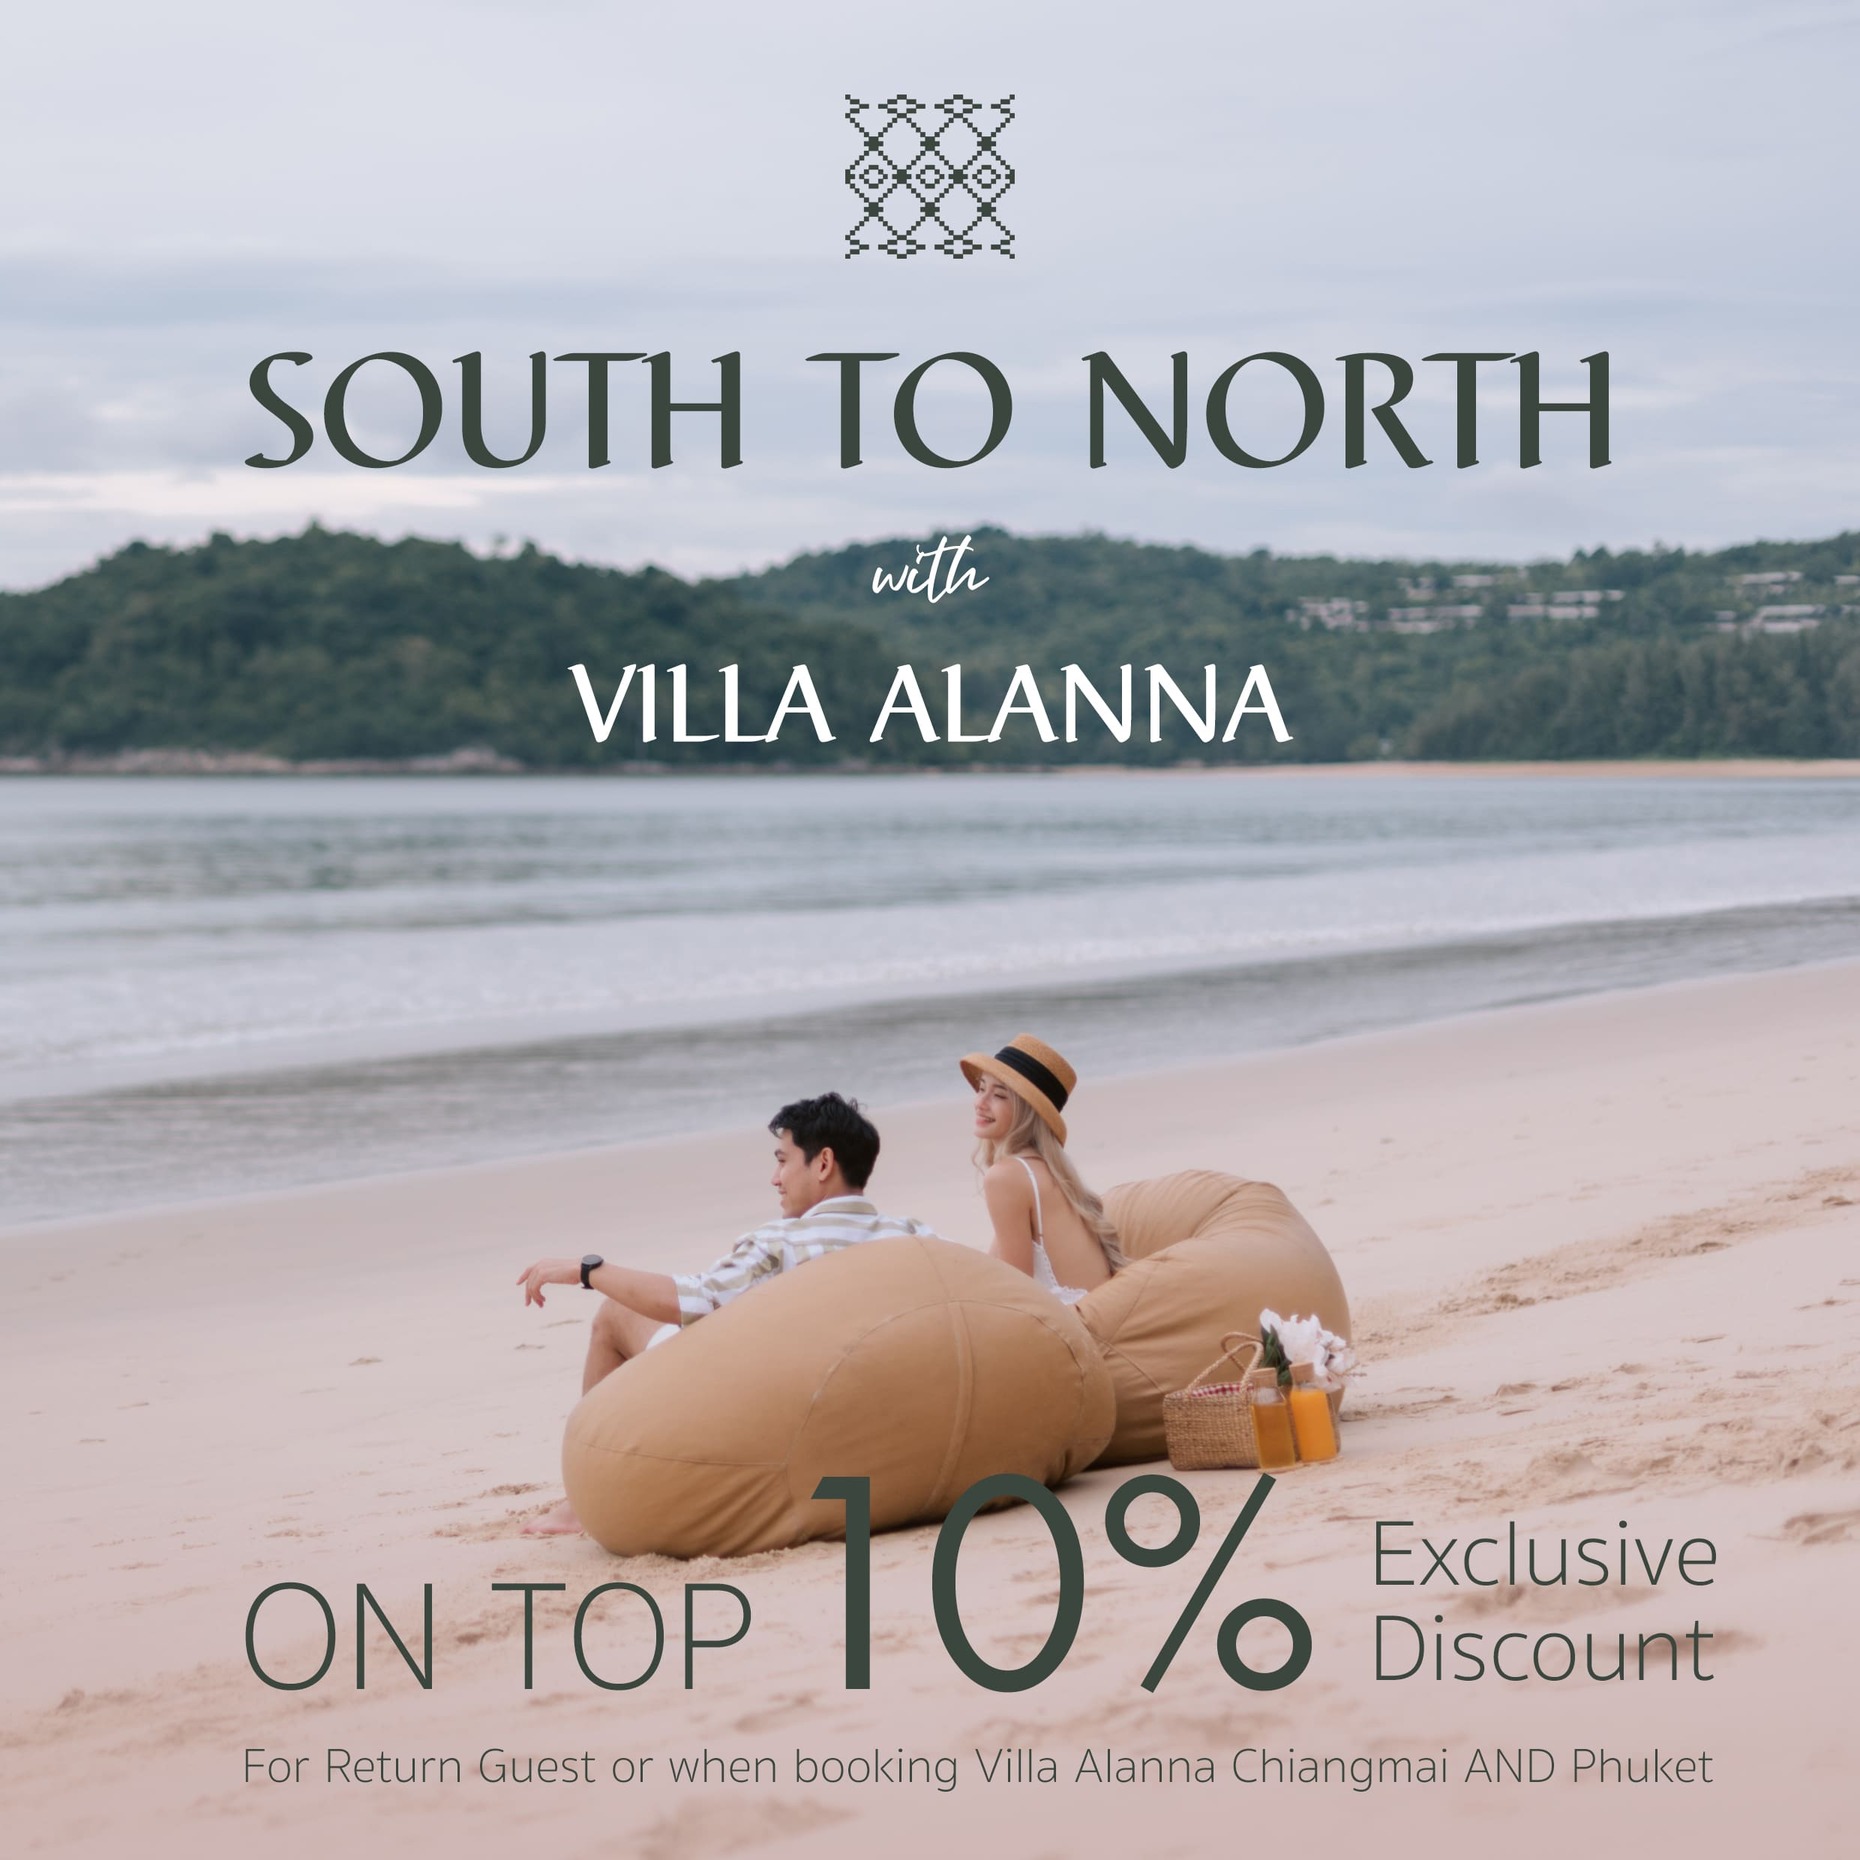 South to North with Villa Alanna